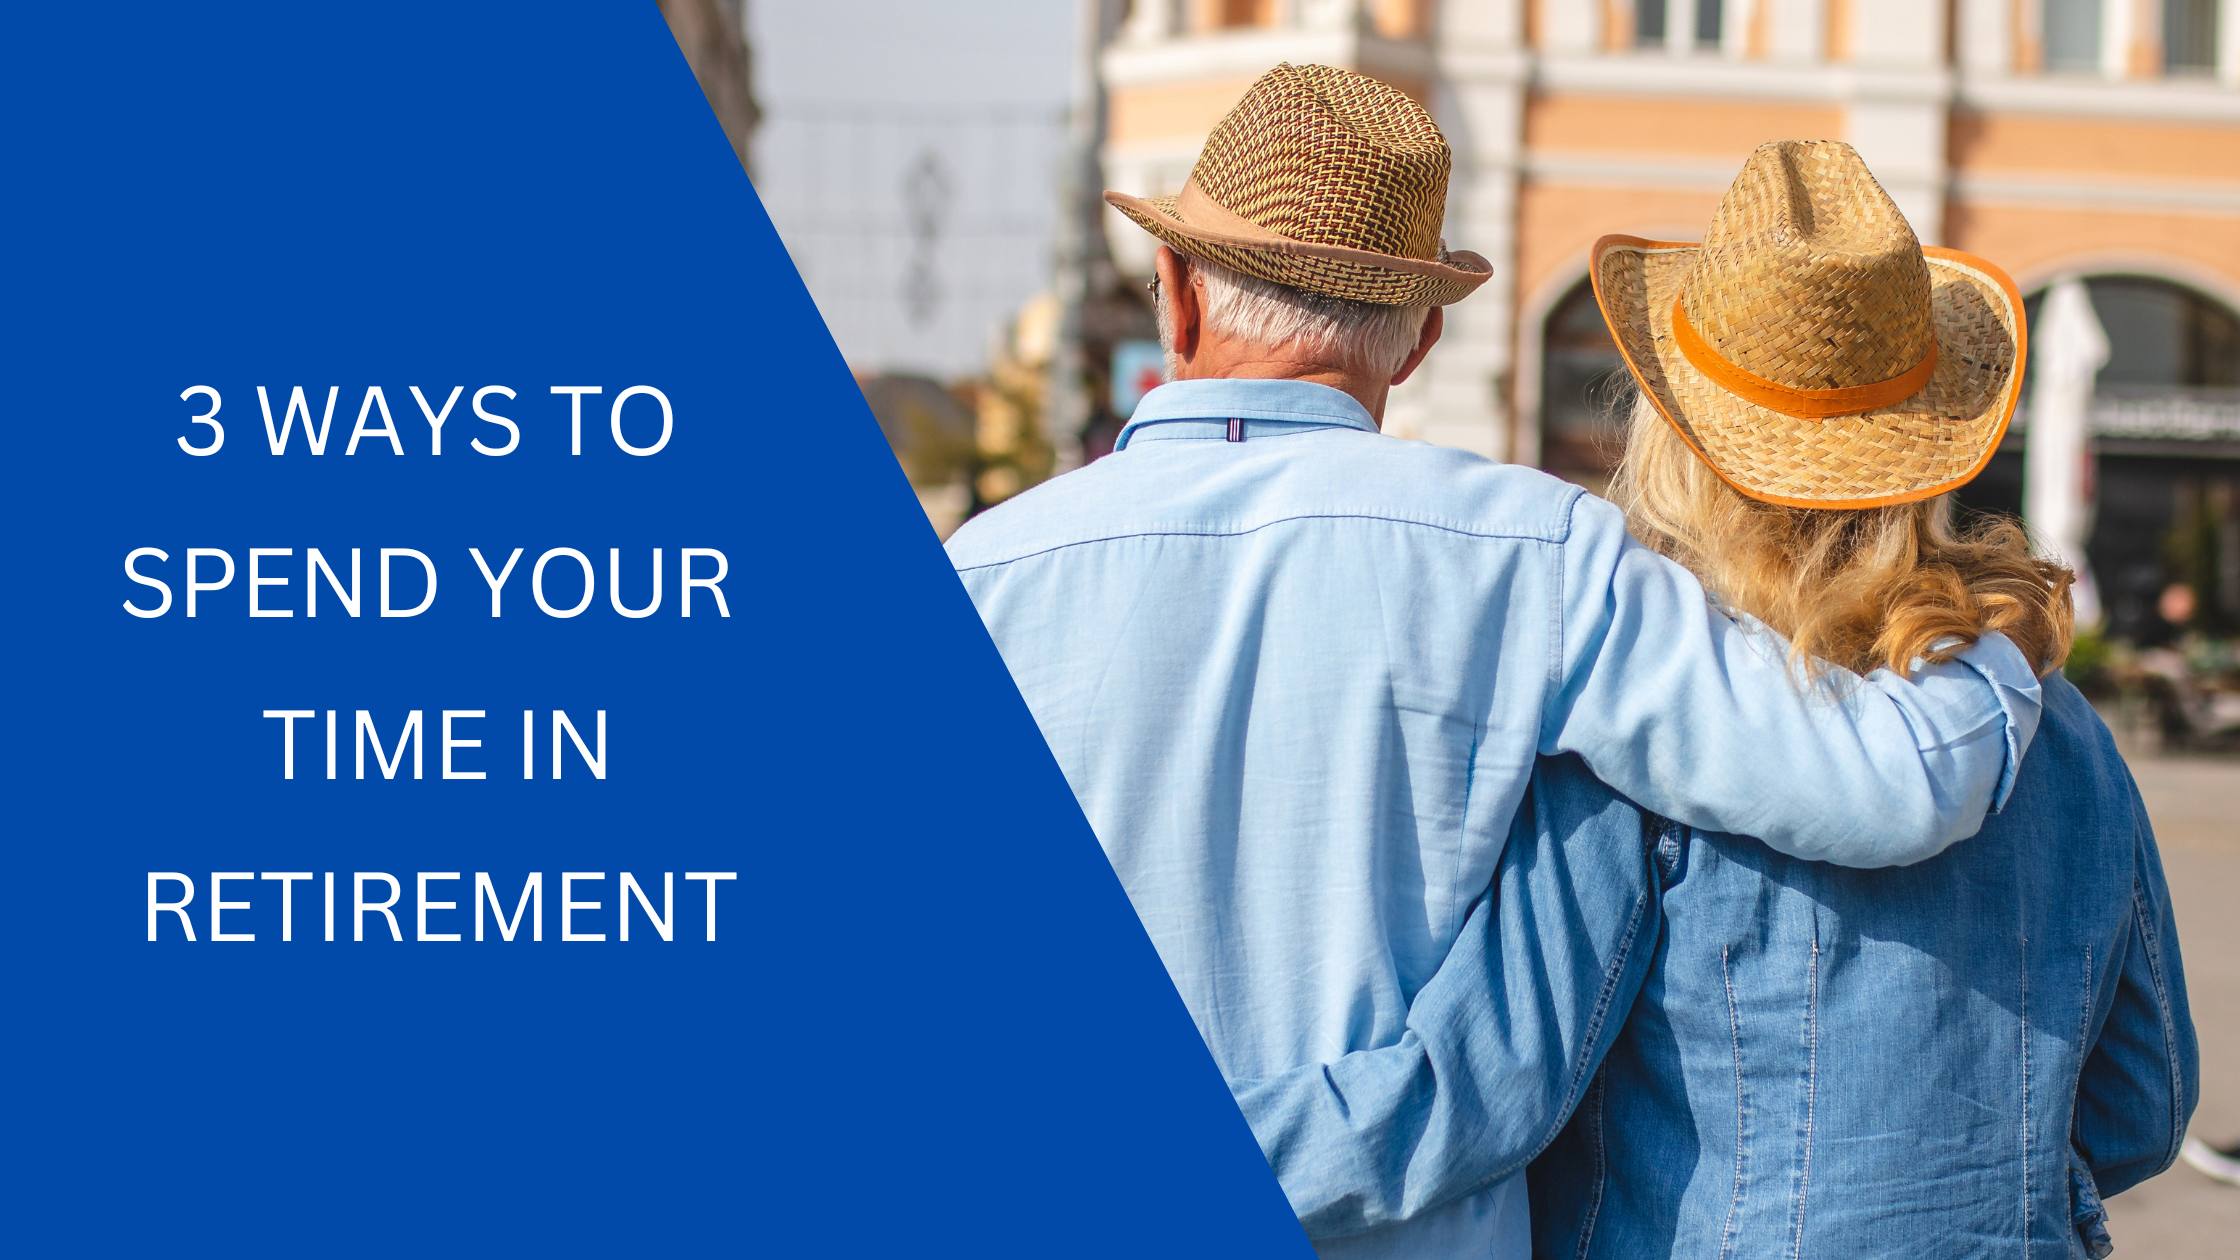 3 Ways To Spend Your Time In Retirement